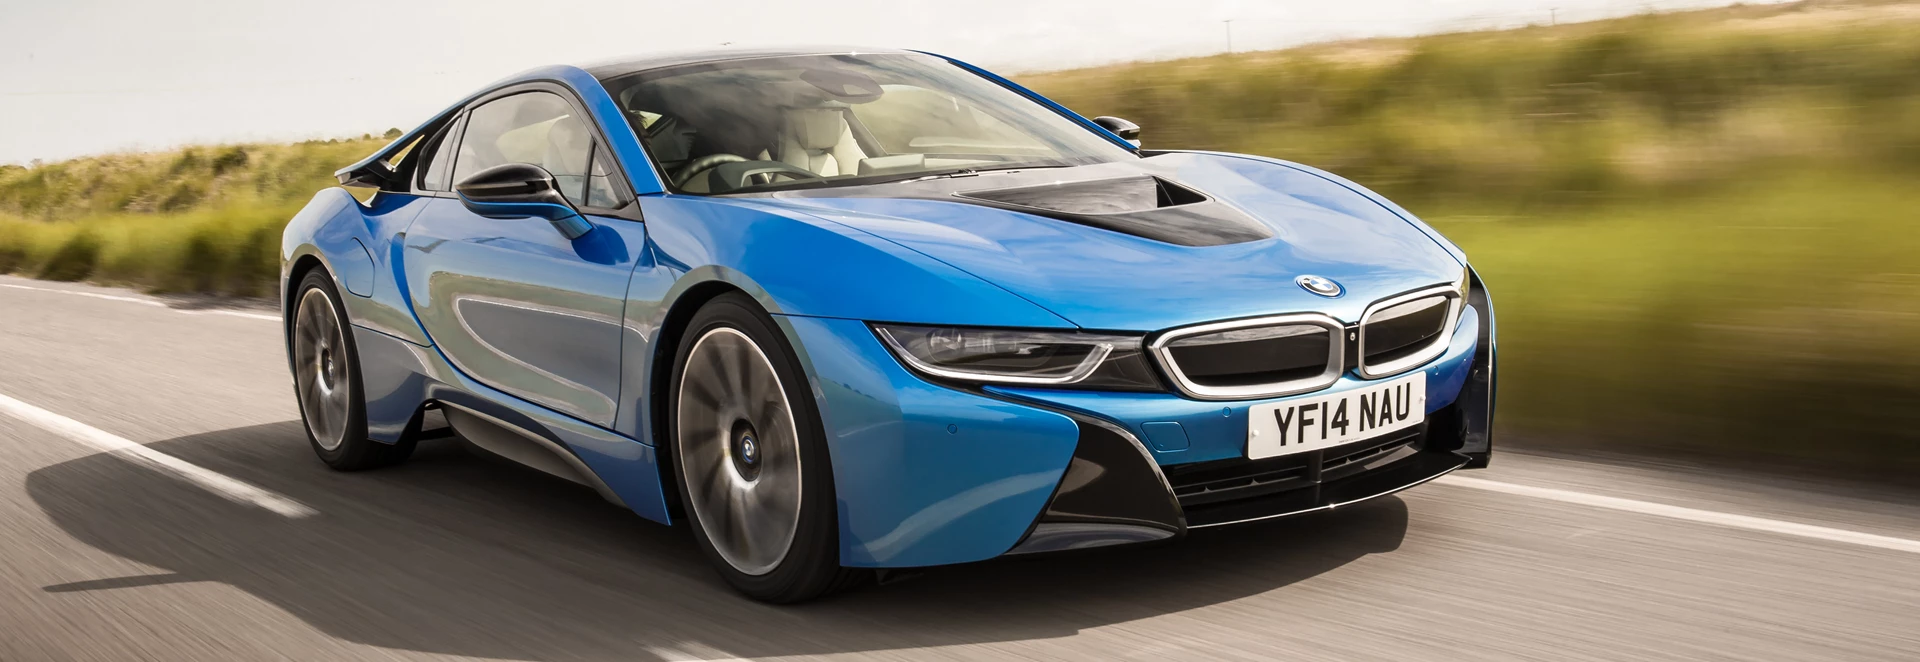 A buyer’s guide to the BMW i8 